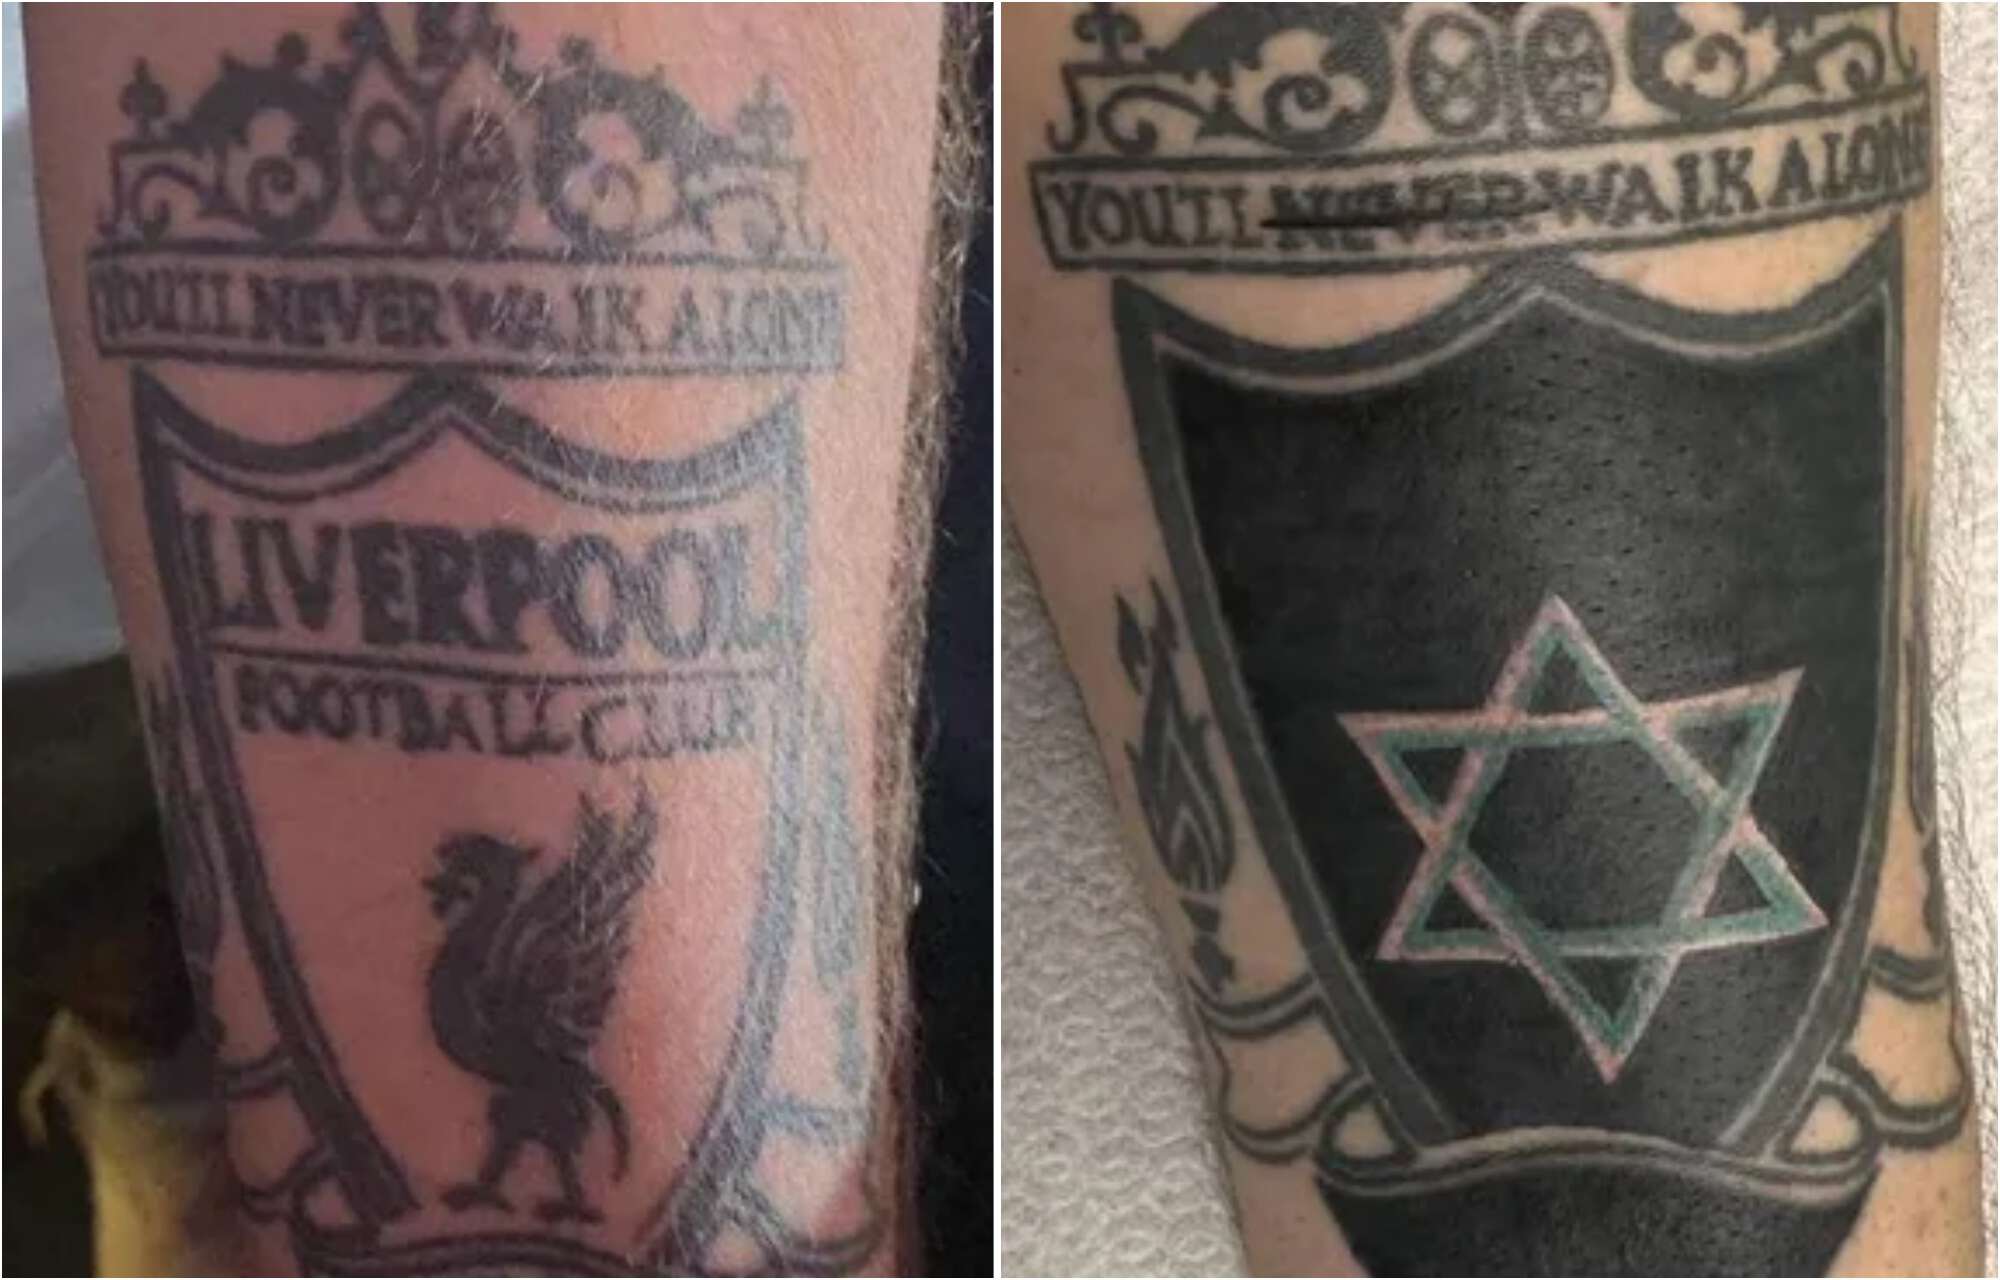 Liverpool fan gets tattoo blacked out after club bans tribute to fans murdered by Hamas